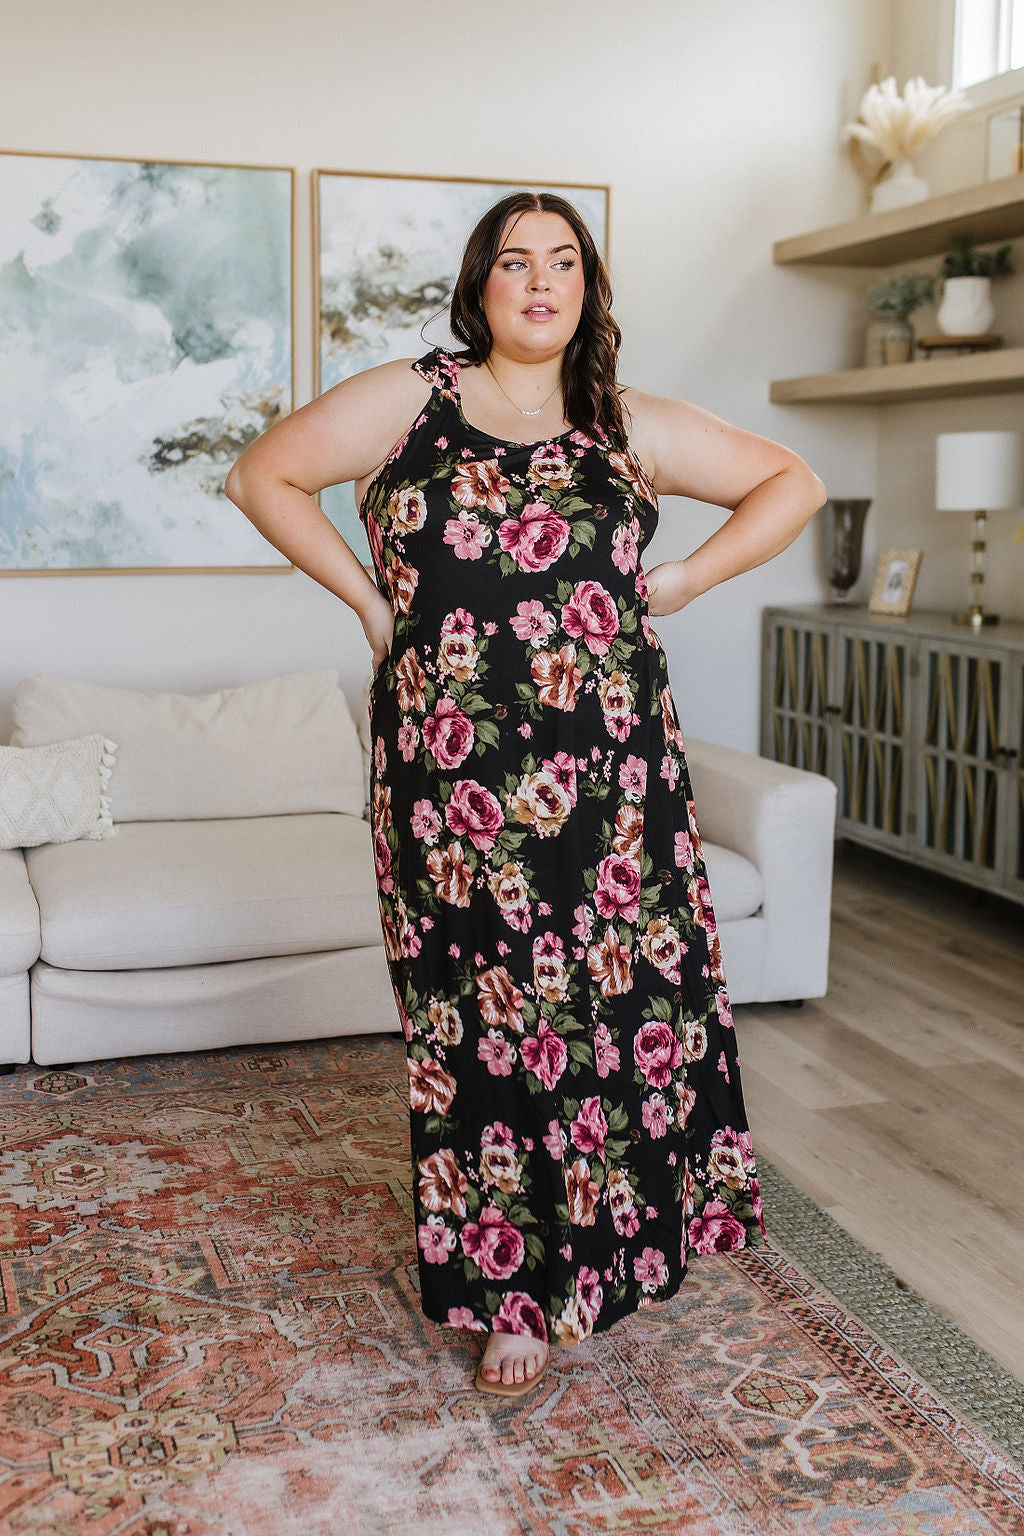 Be picture-perfect in this Fortuitous Floral Maxi dress. Its lightweight jersey knit fabric flatters your figure, while the adjustable drawstring back and functional tie offer an elegant touch. Plus, the large scale floral print looks vibrant and eye-catching. Let your style blossom! S - 3X